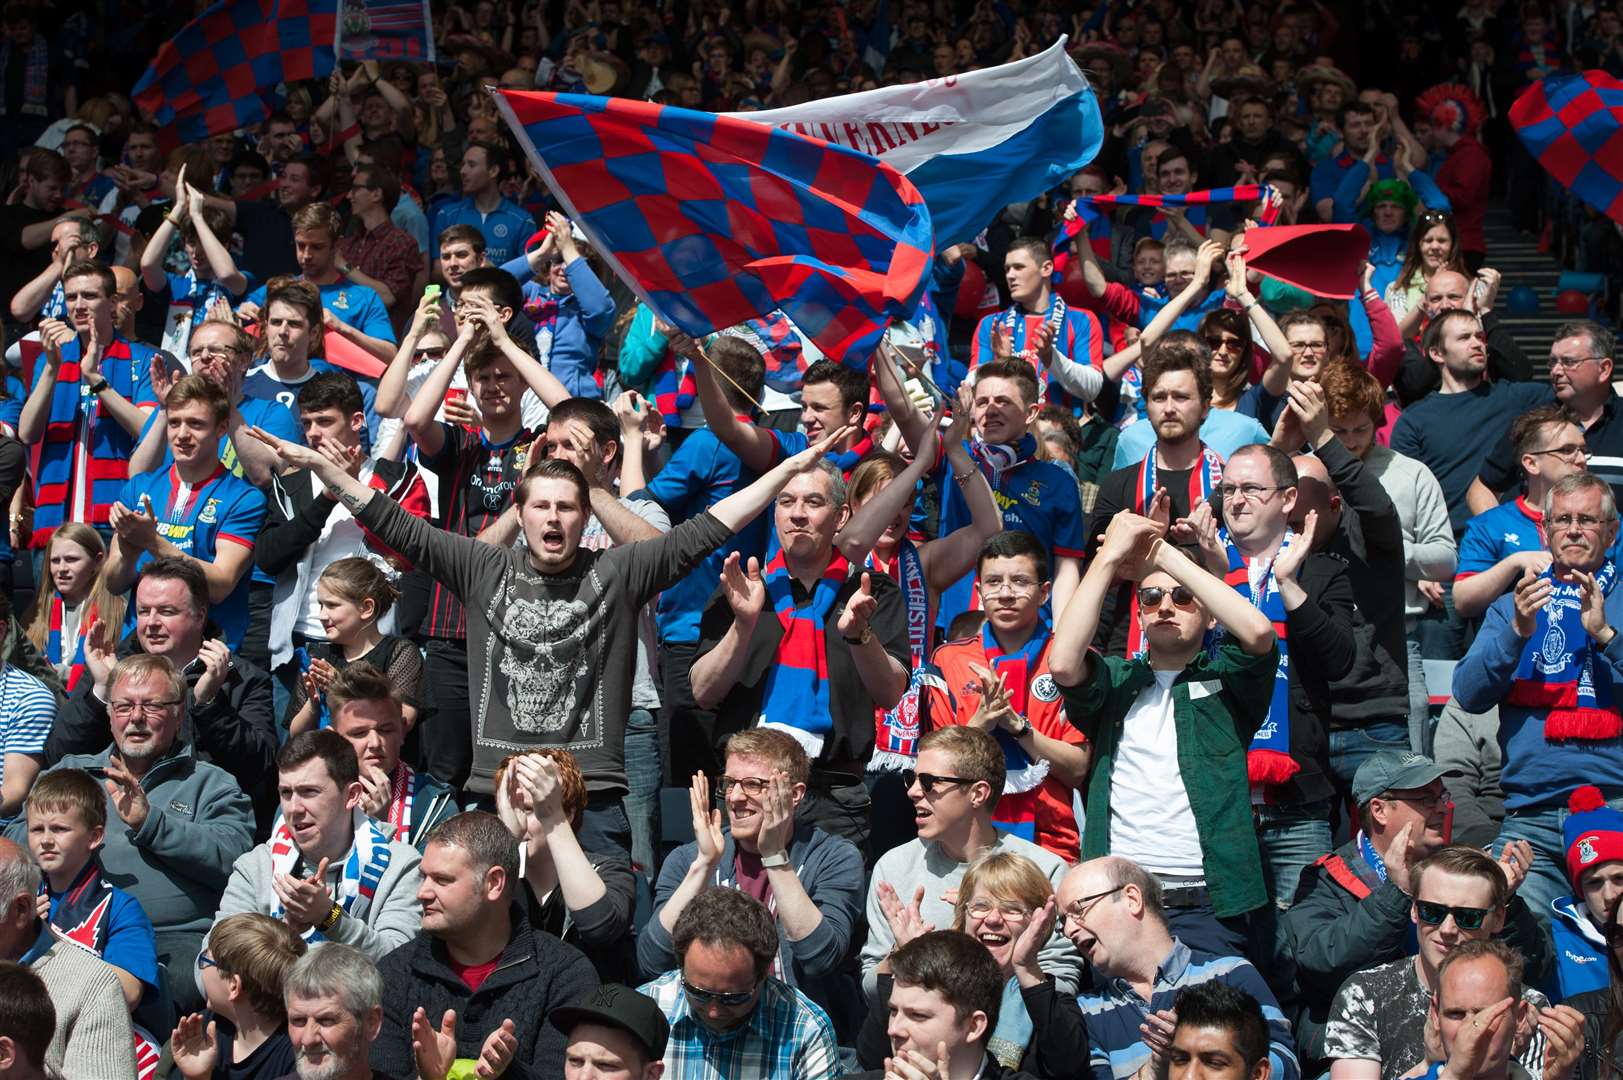 Some of Caley Thistle's support during the 2015 Scottish Cup final at Hampden. Picture: Callum Mackay